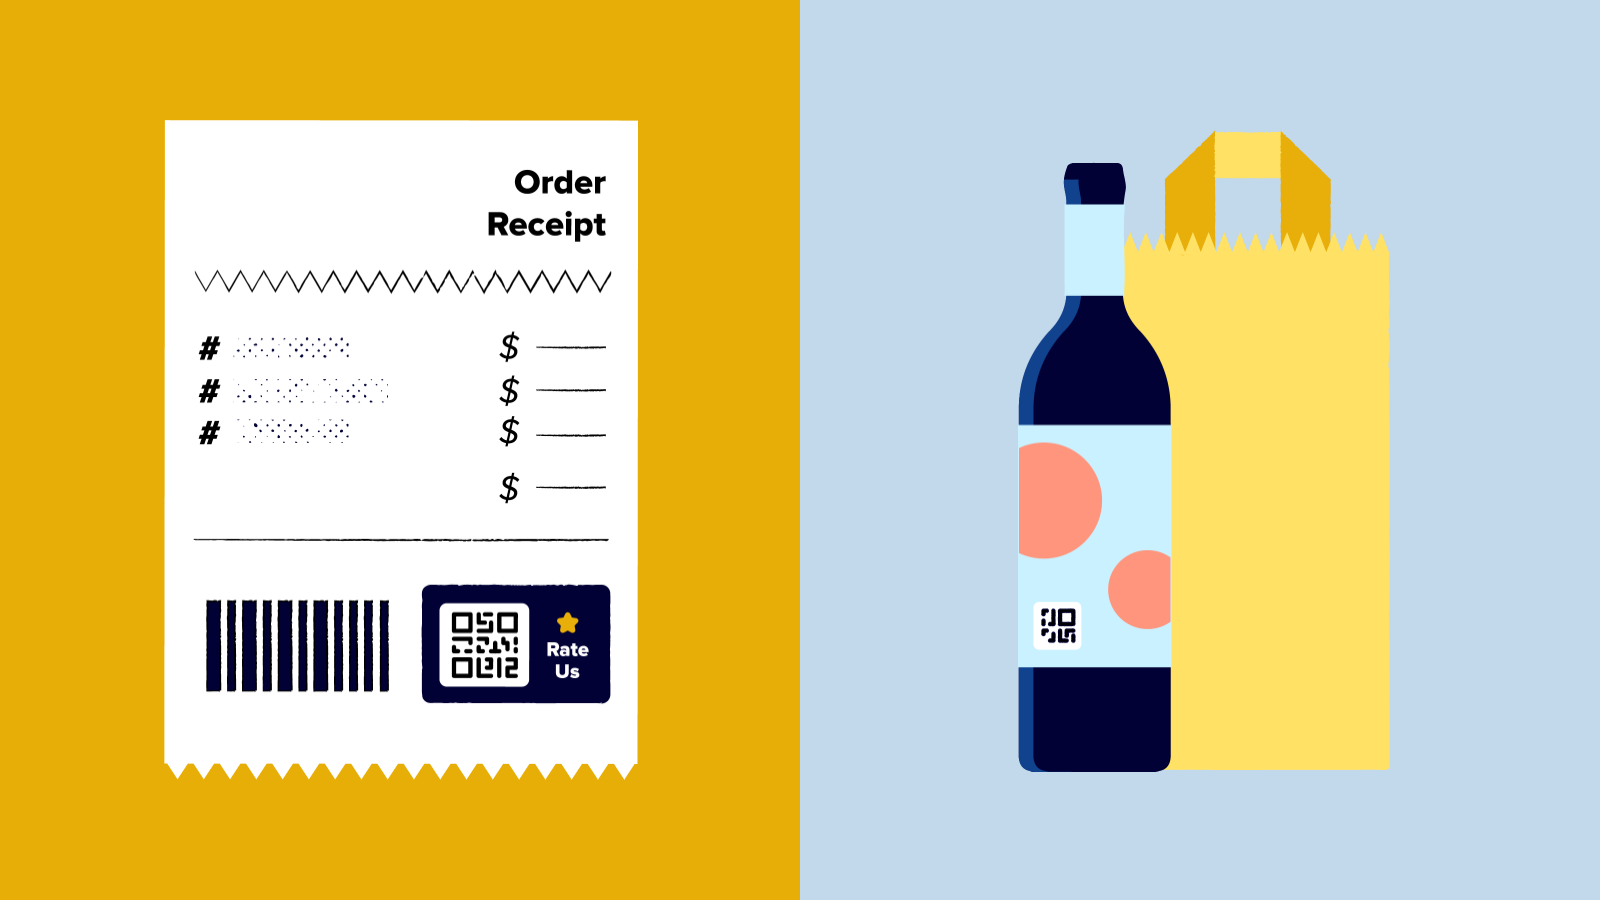 Order receipt with QR code for rating and wine bottle with QR code